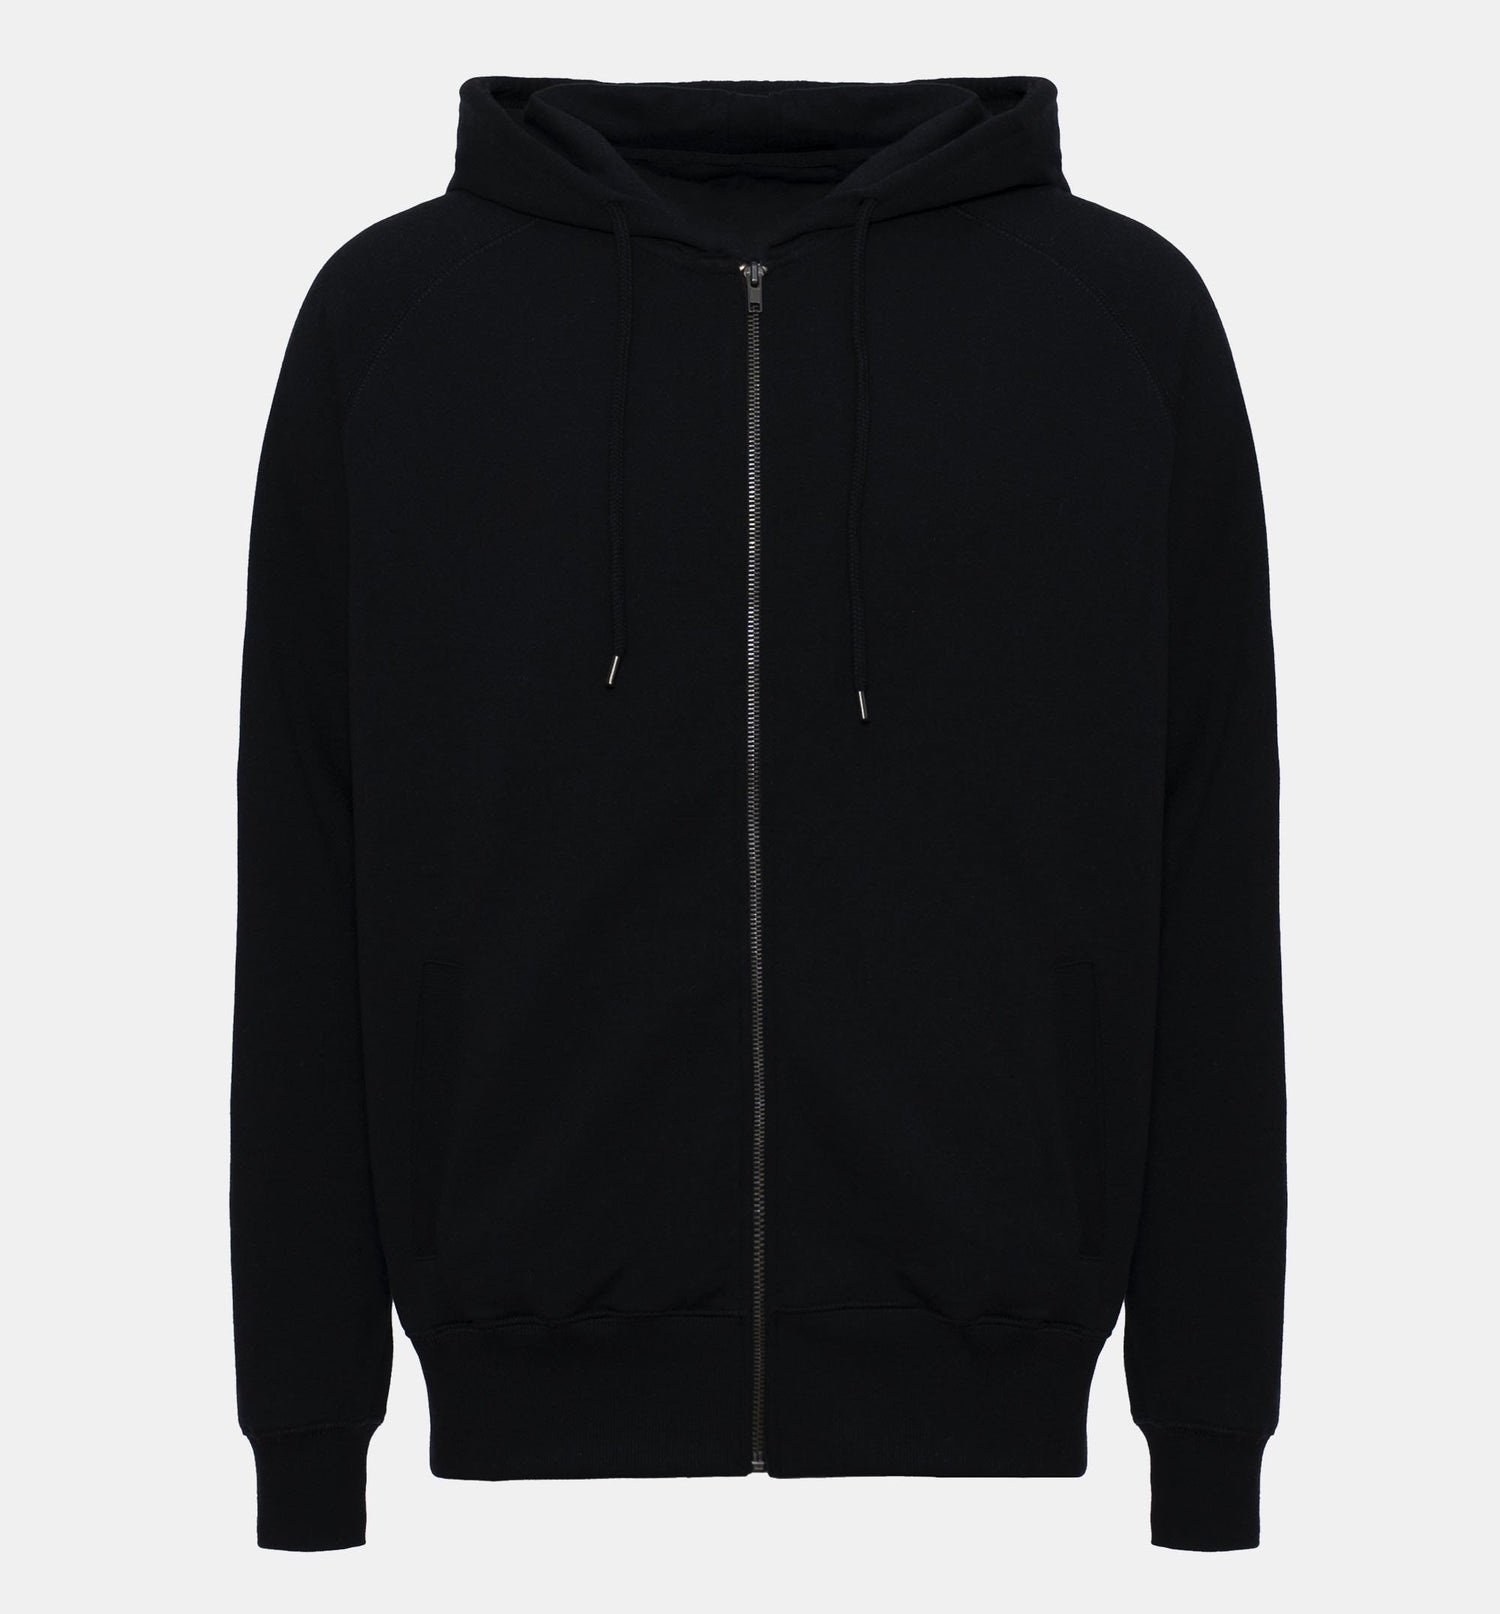 Pure Waste Unisex Zip Hoodie Raglan - Recycled Cotton & Recycled Polyester Black Shirt